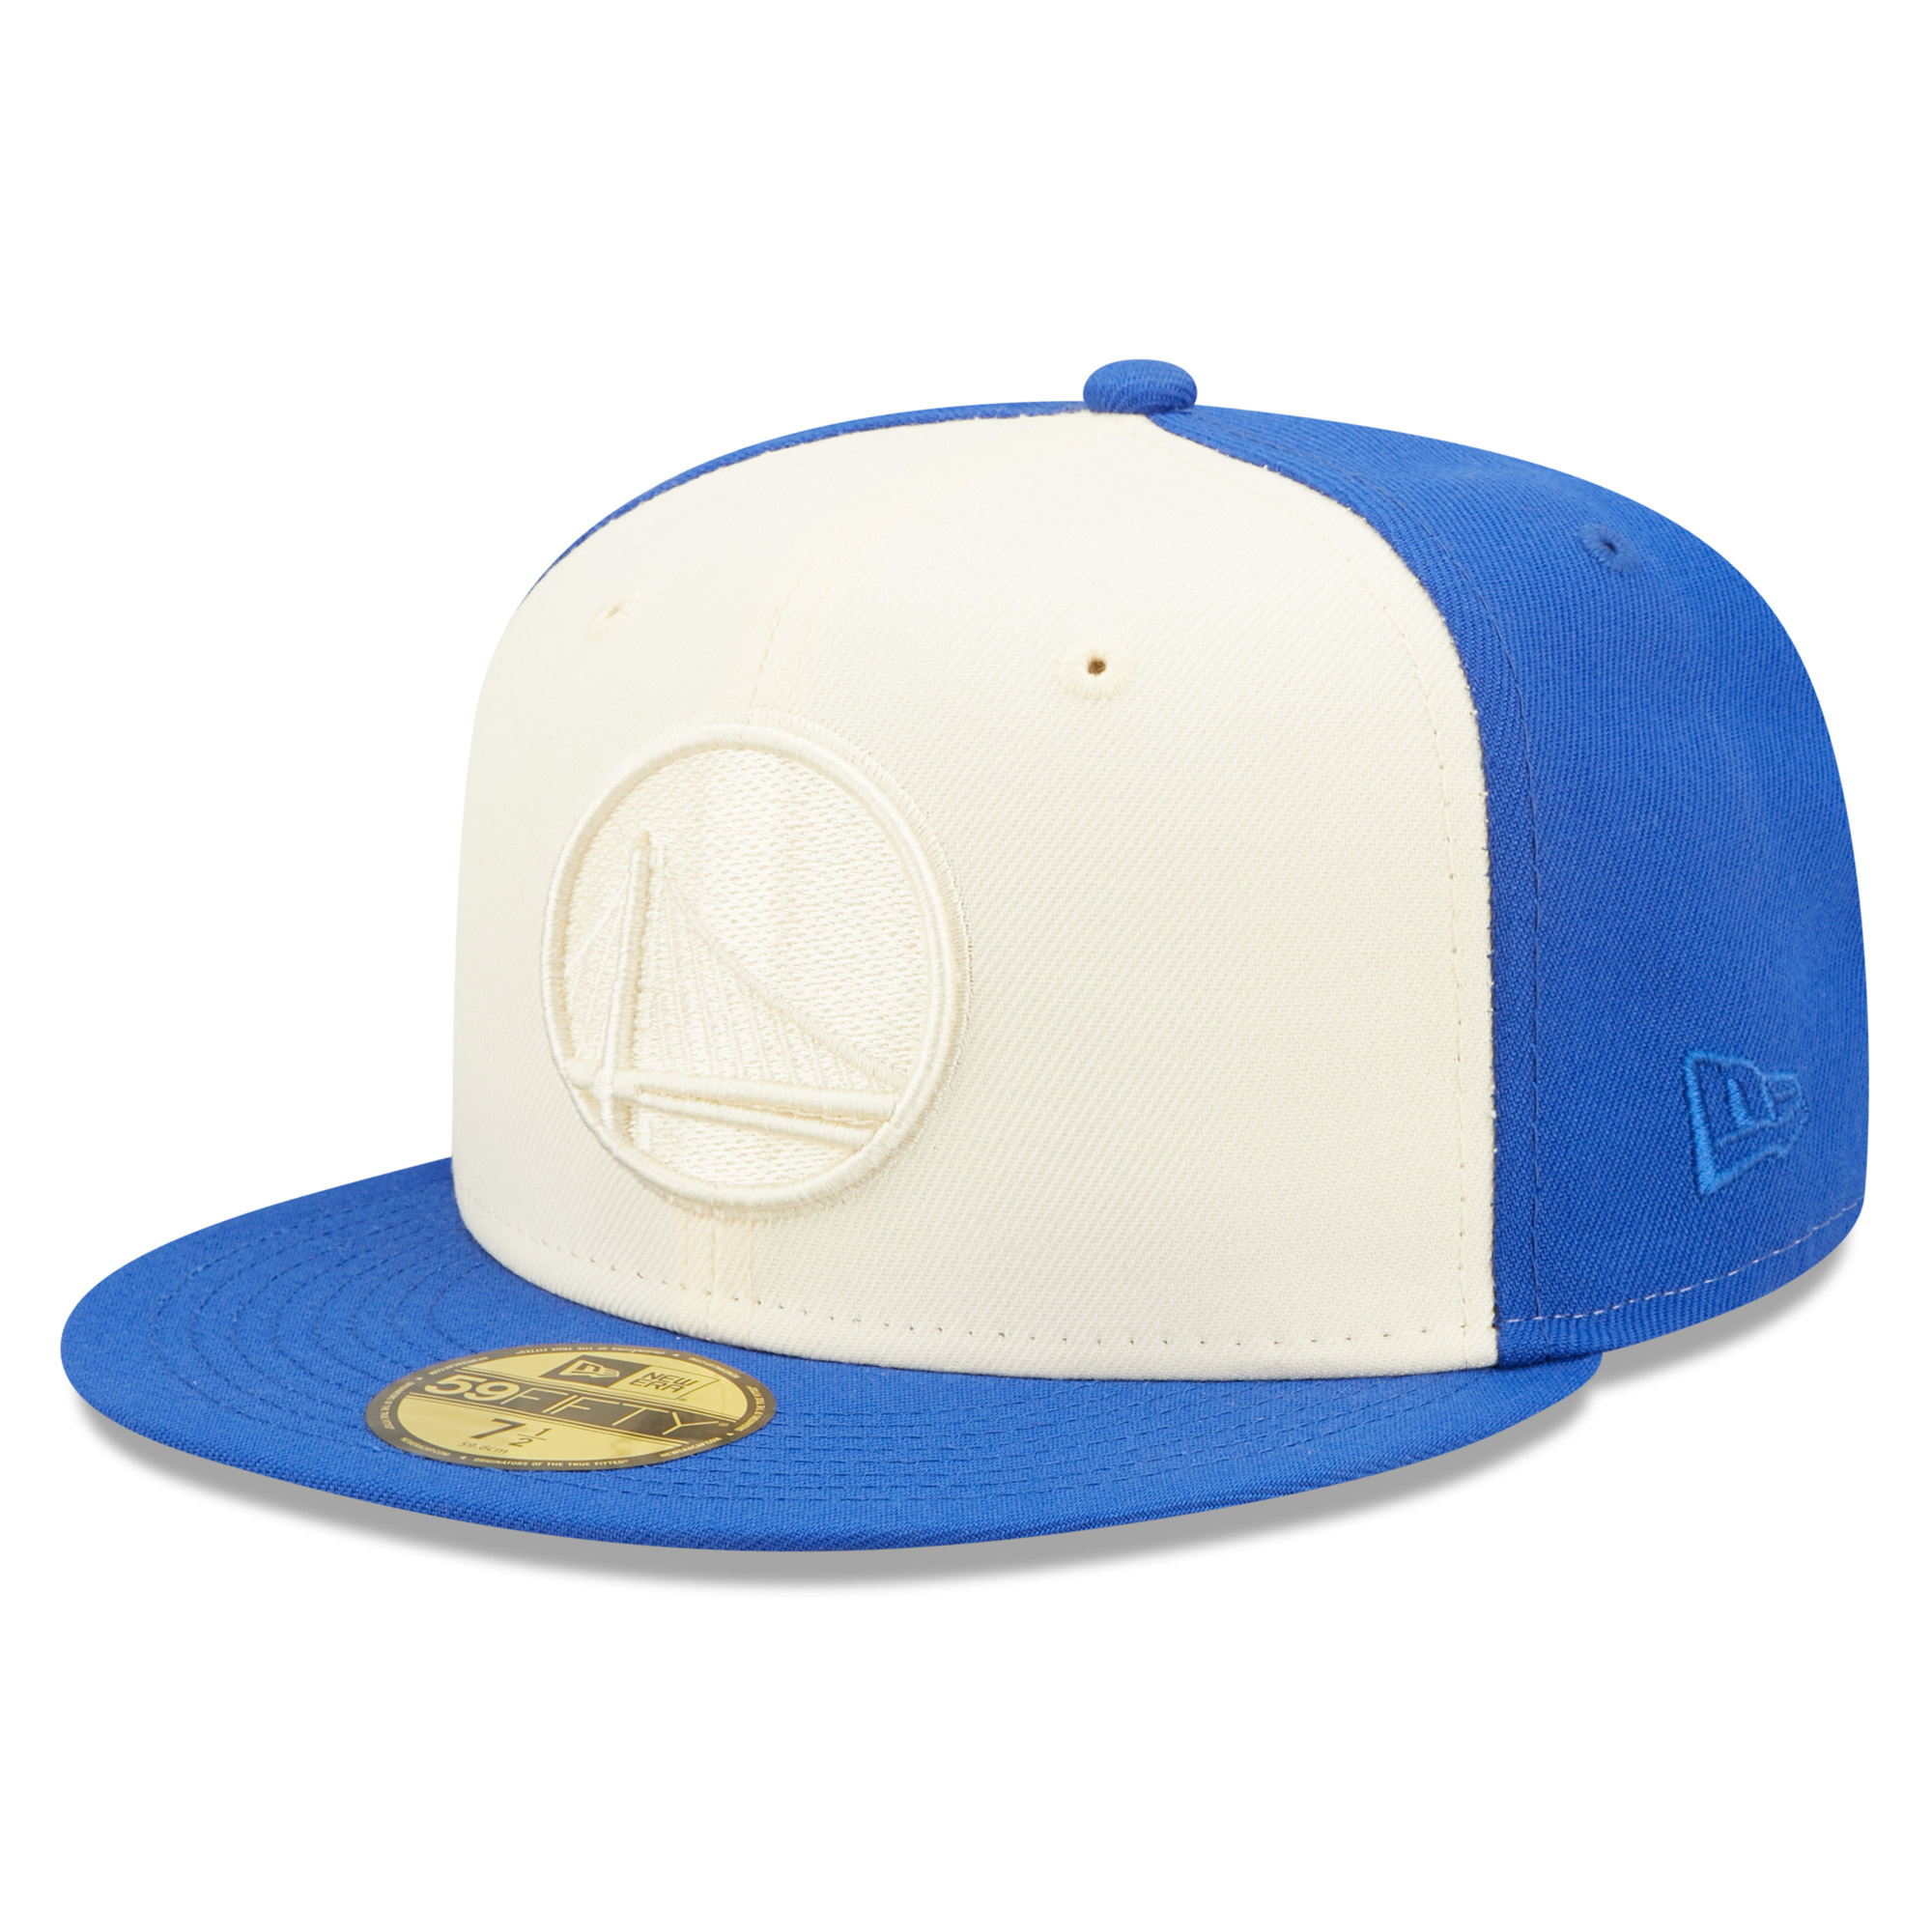 NEW ERA GOLDEN STATE WARRIORS 2-TONE 59FIFTY FITTED HAT -BLUE/CREAM